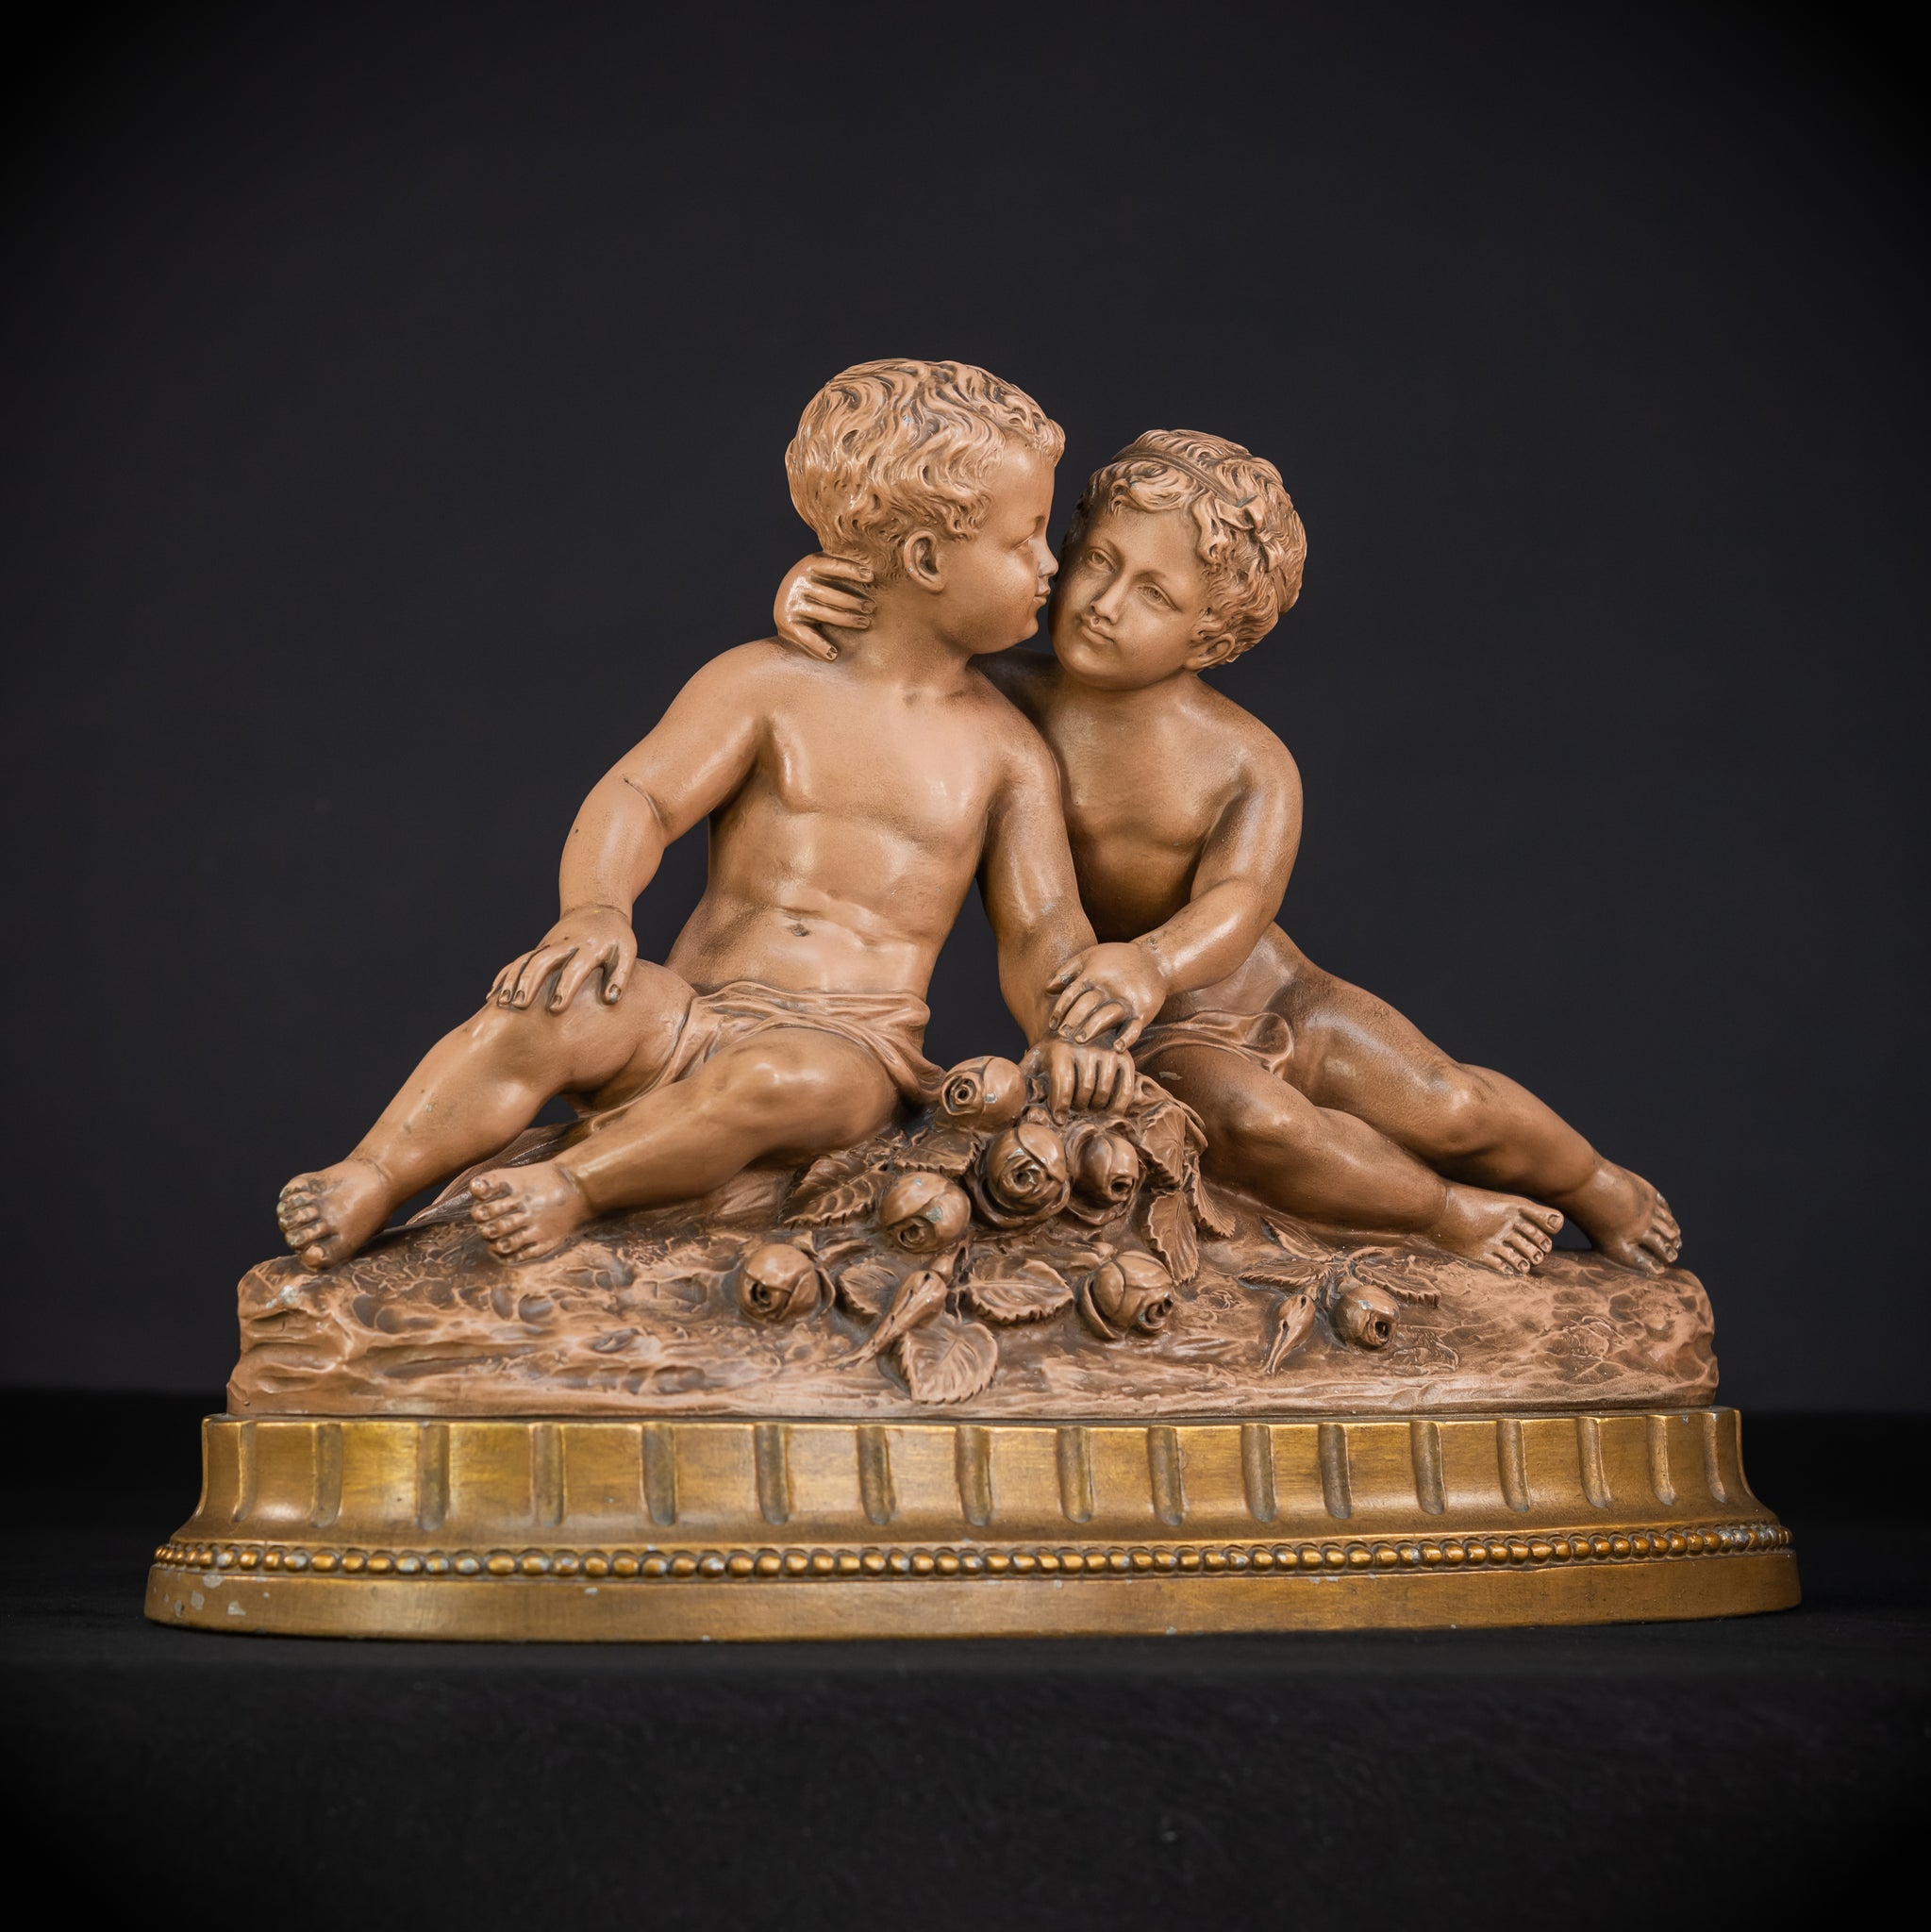 Putti Terracotta Sculpture | Signed H Heusers | Early 1900s Antique | 18.9" / 48 cm